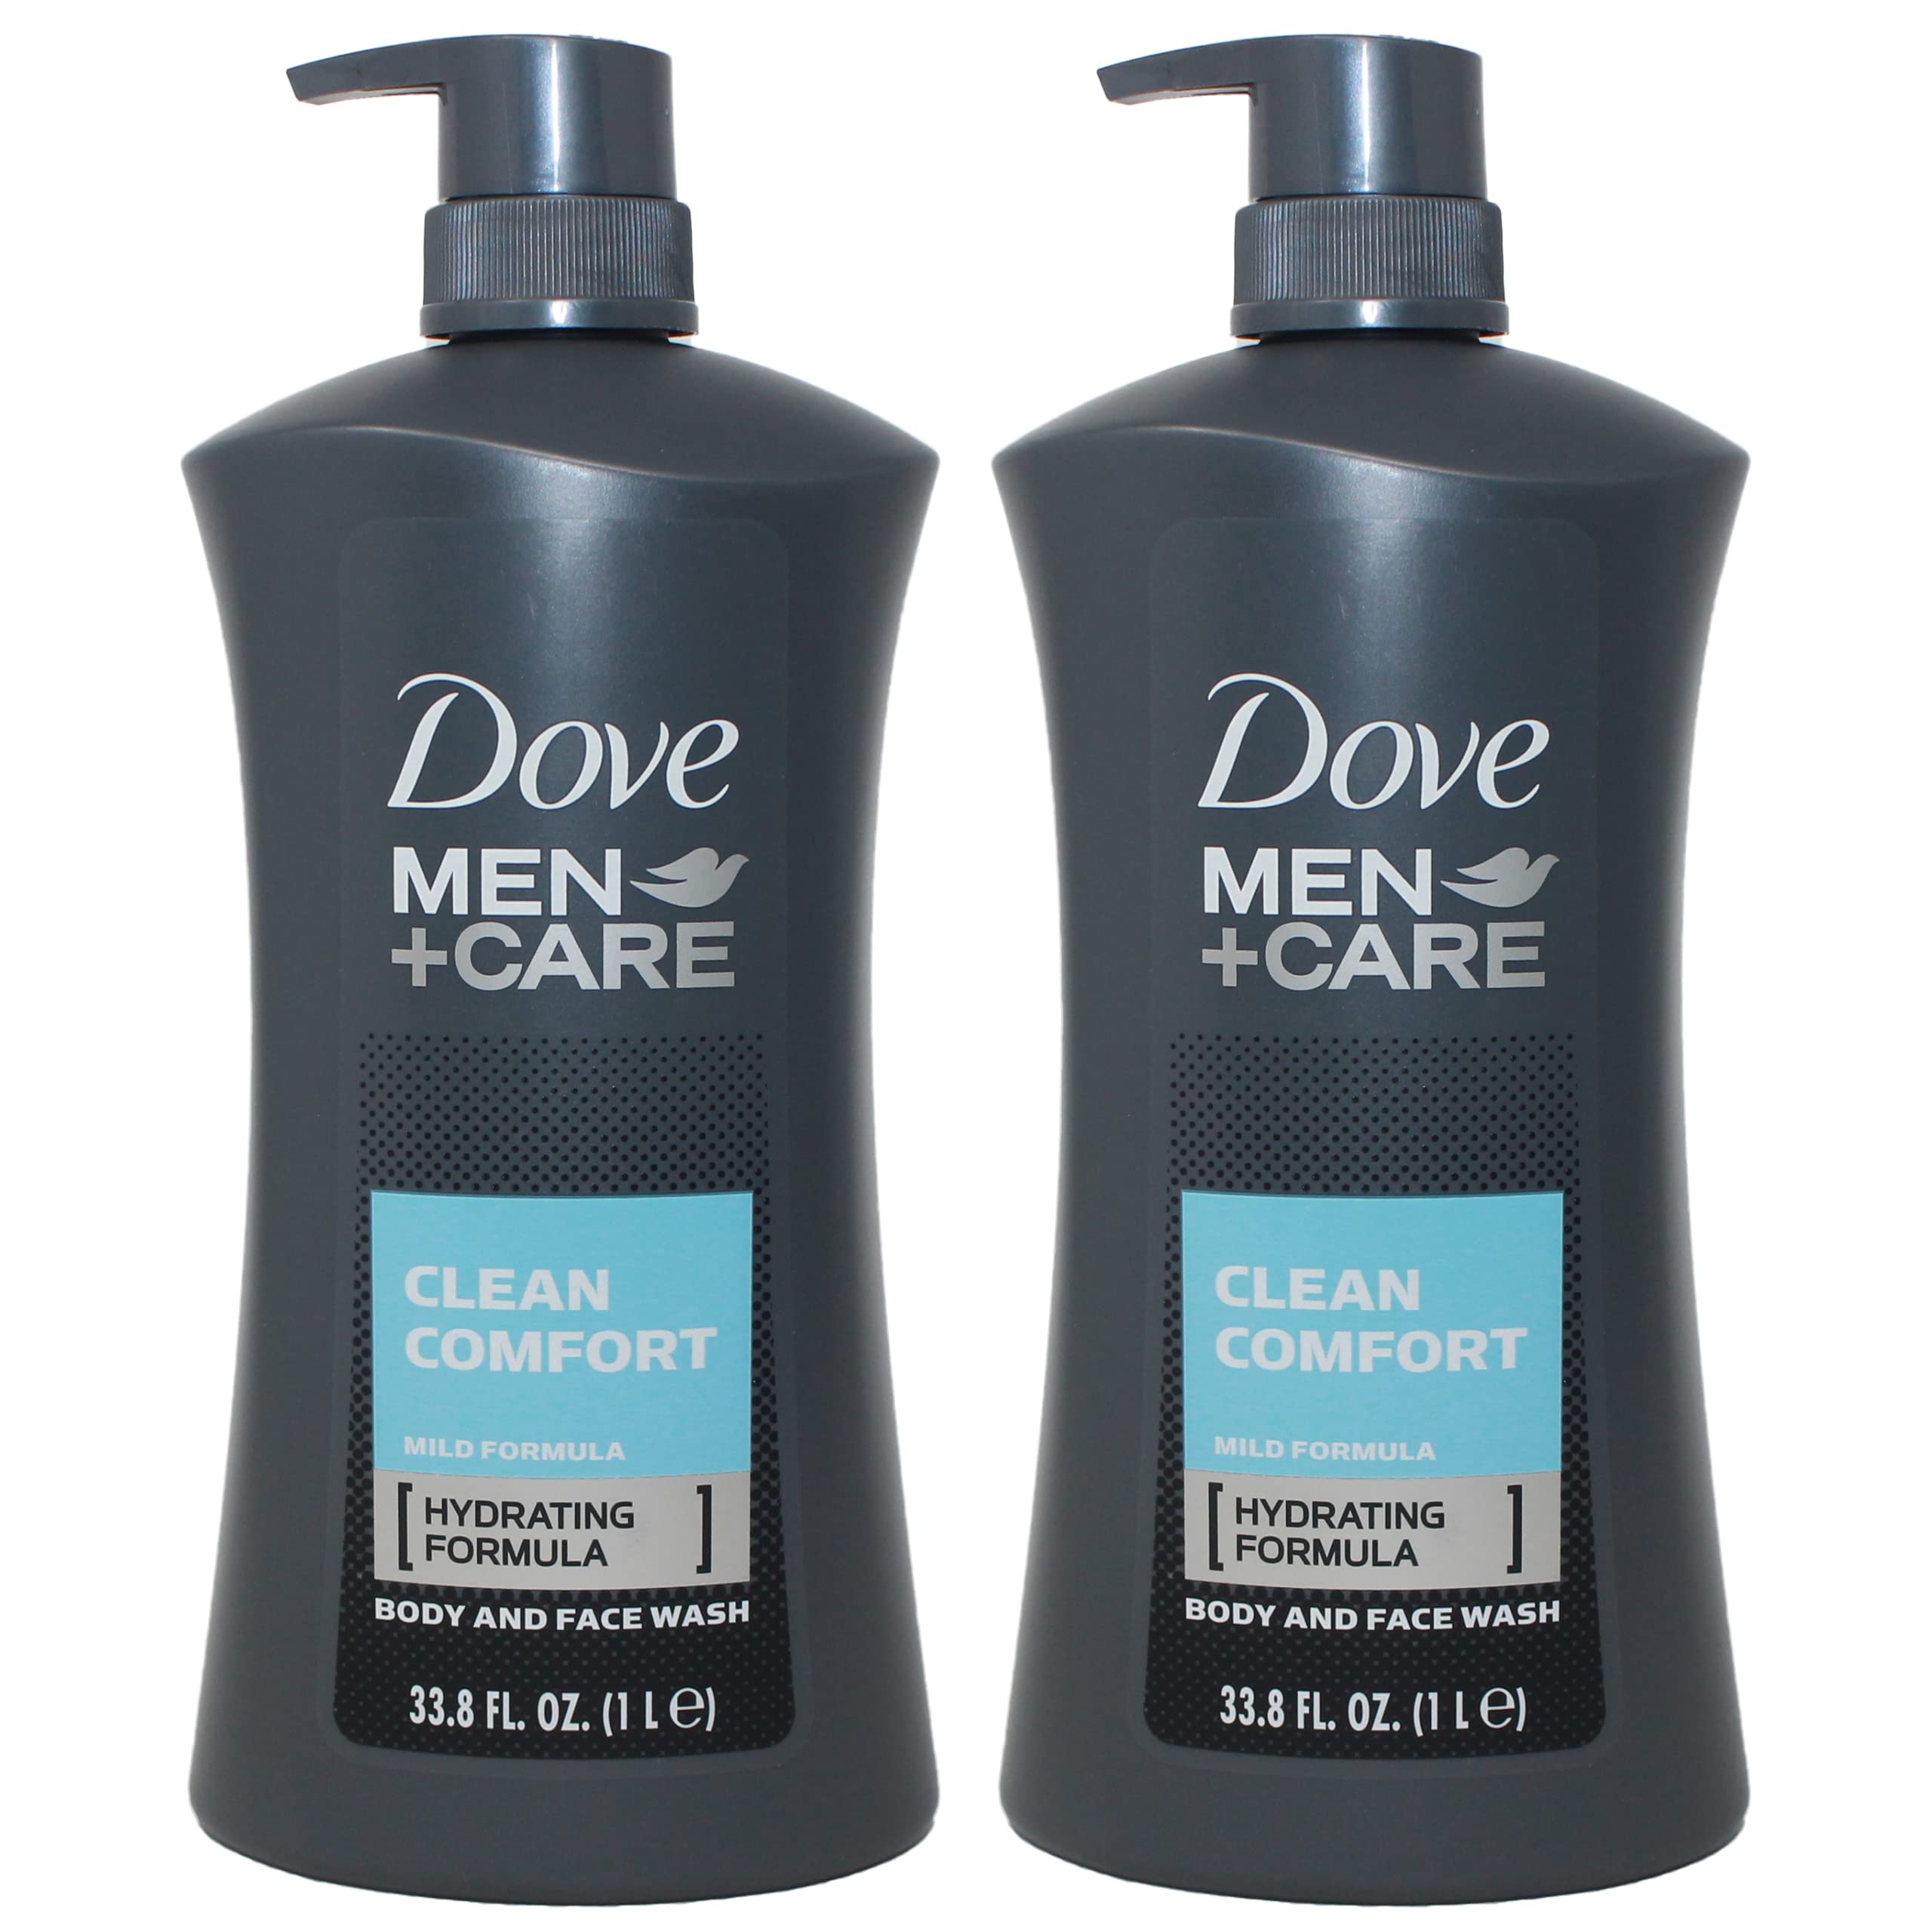 Dove Men + Care Body and Face Wash, Clean Comfort Scent Hydrating Formel, 36 oz Pumpflasche (2 Stück)